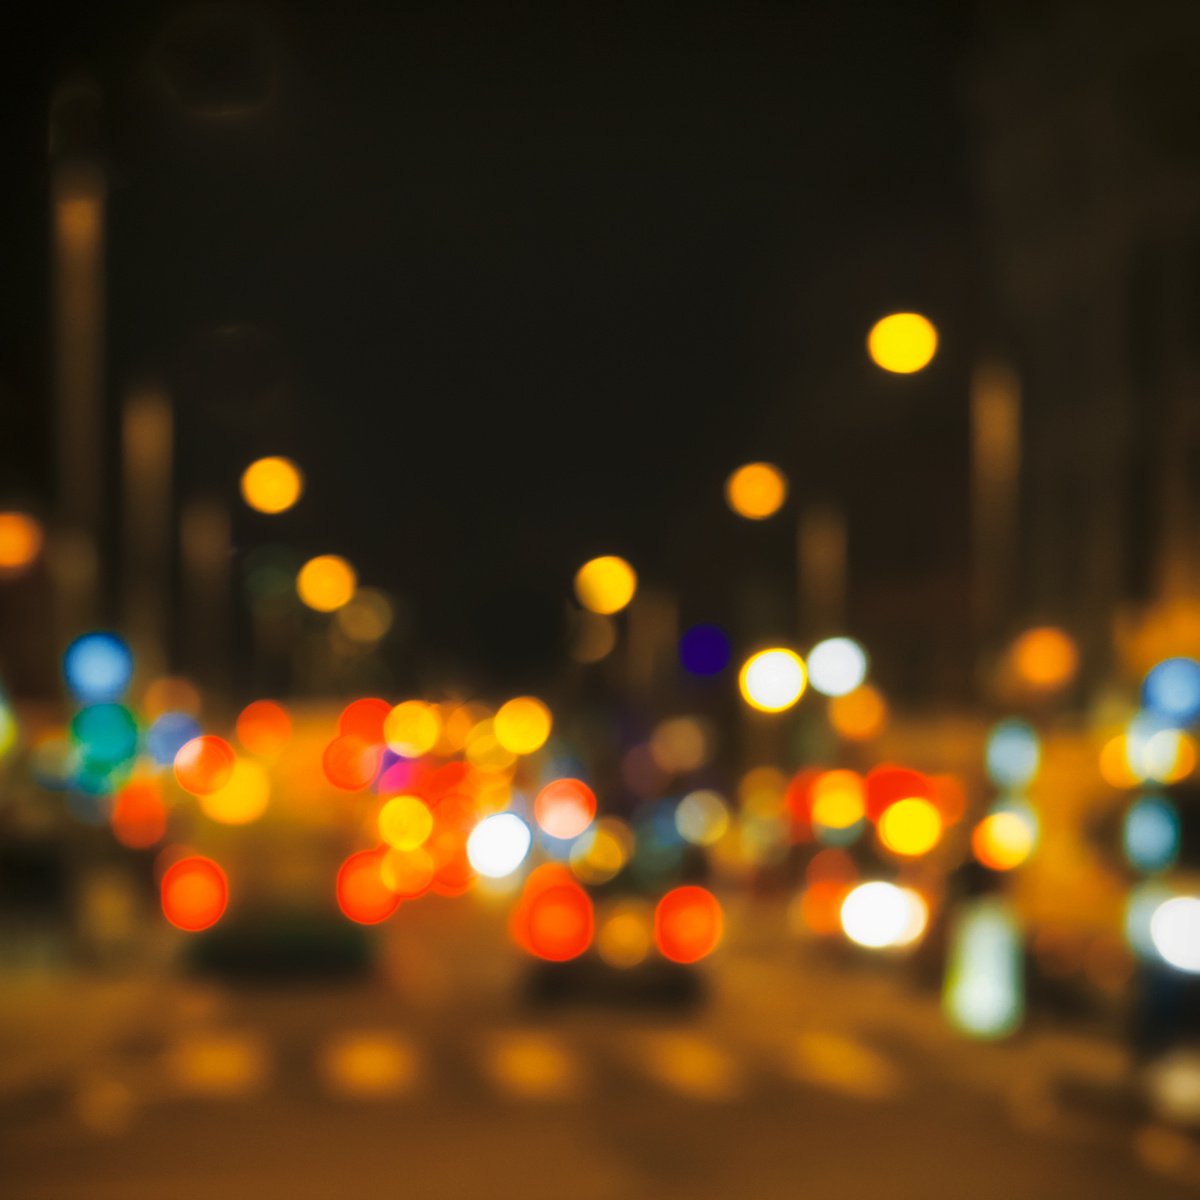 City Lights 2. Limited Edition Abstract Photograph Print #1/15. Nighttime abstract photog... by Graham Briggs